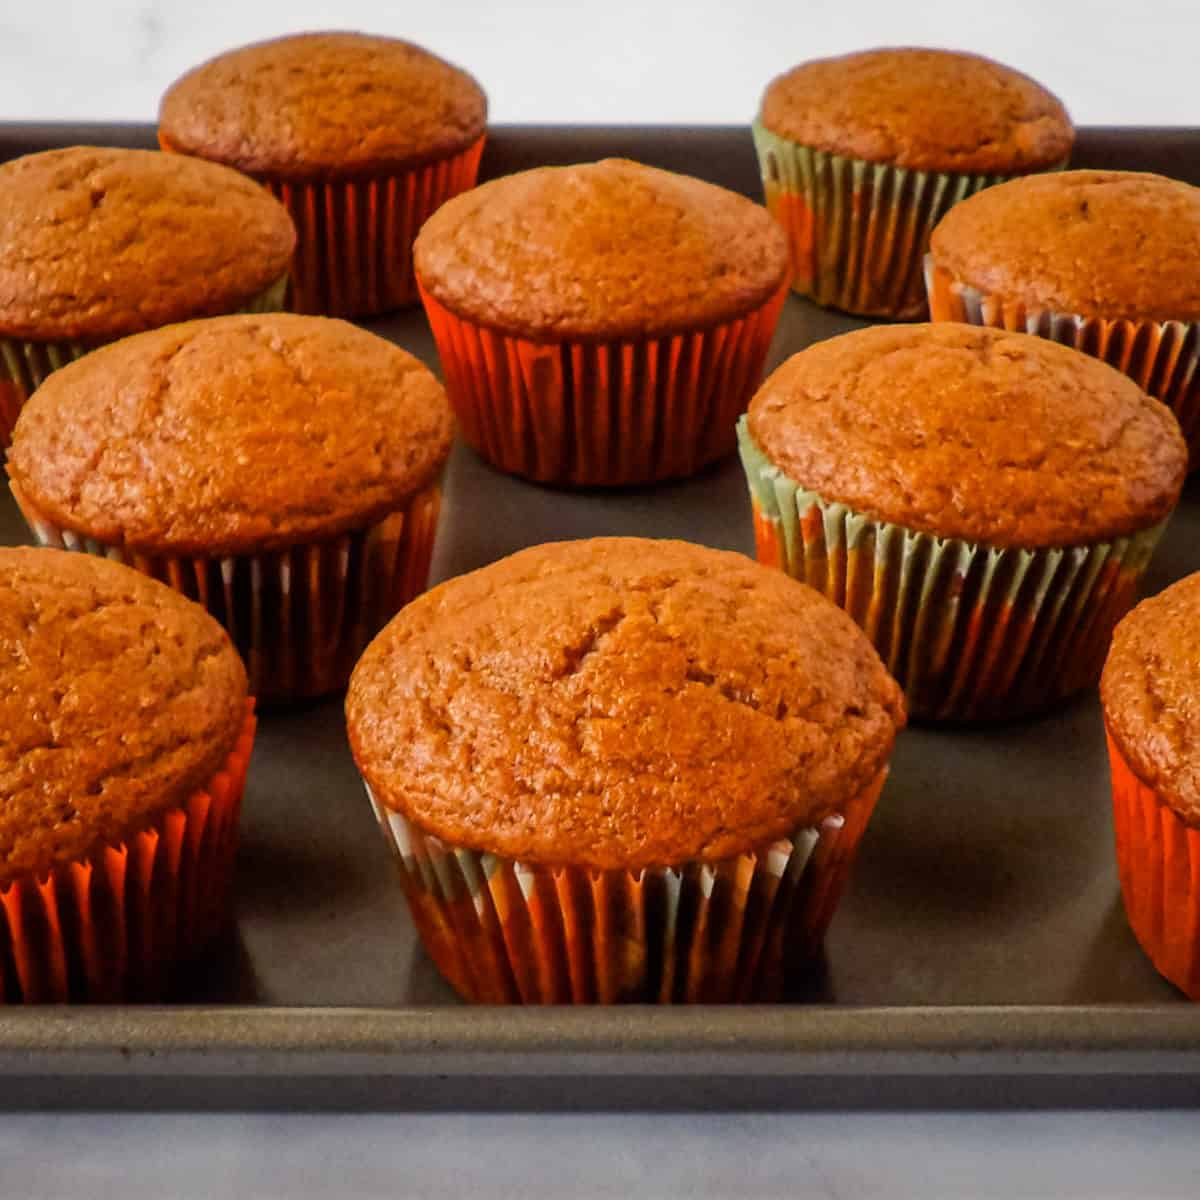 Cooked pumpkin cupcakes cooling on a baking sheet.